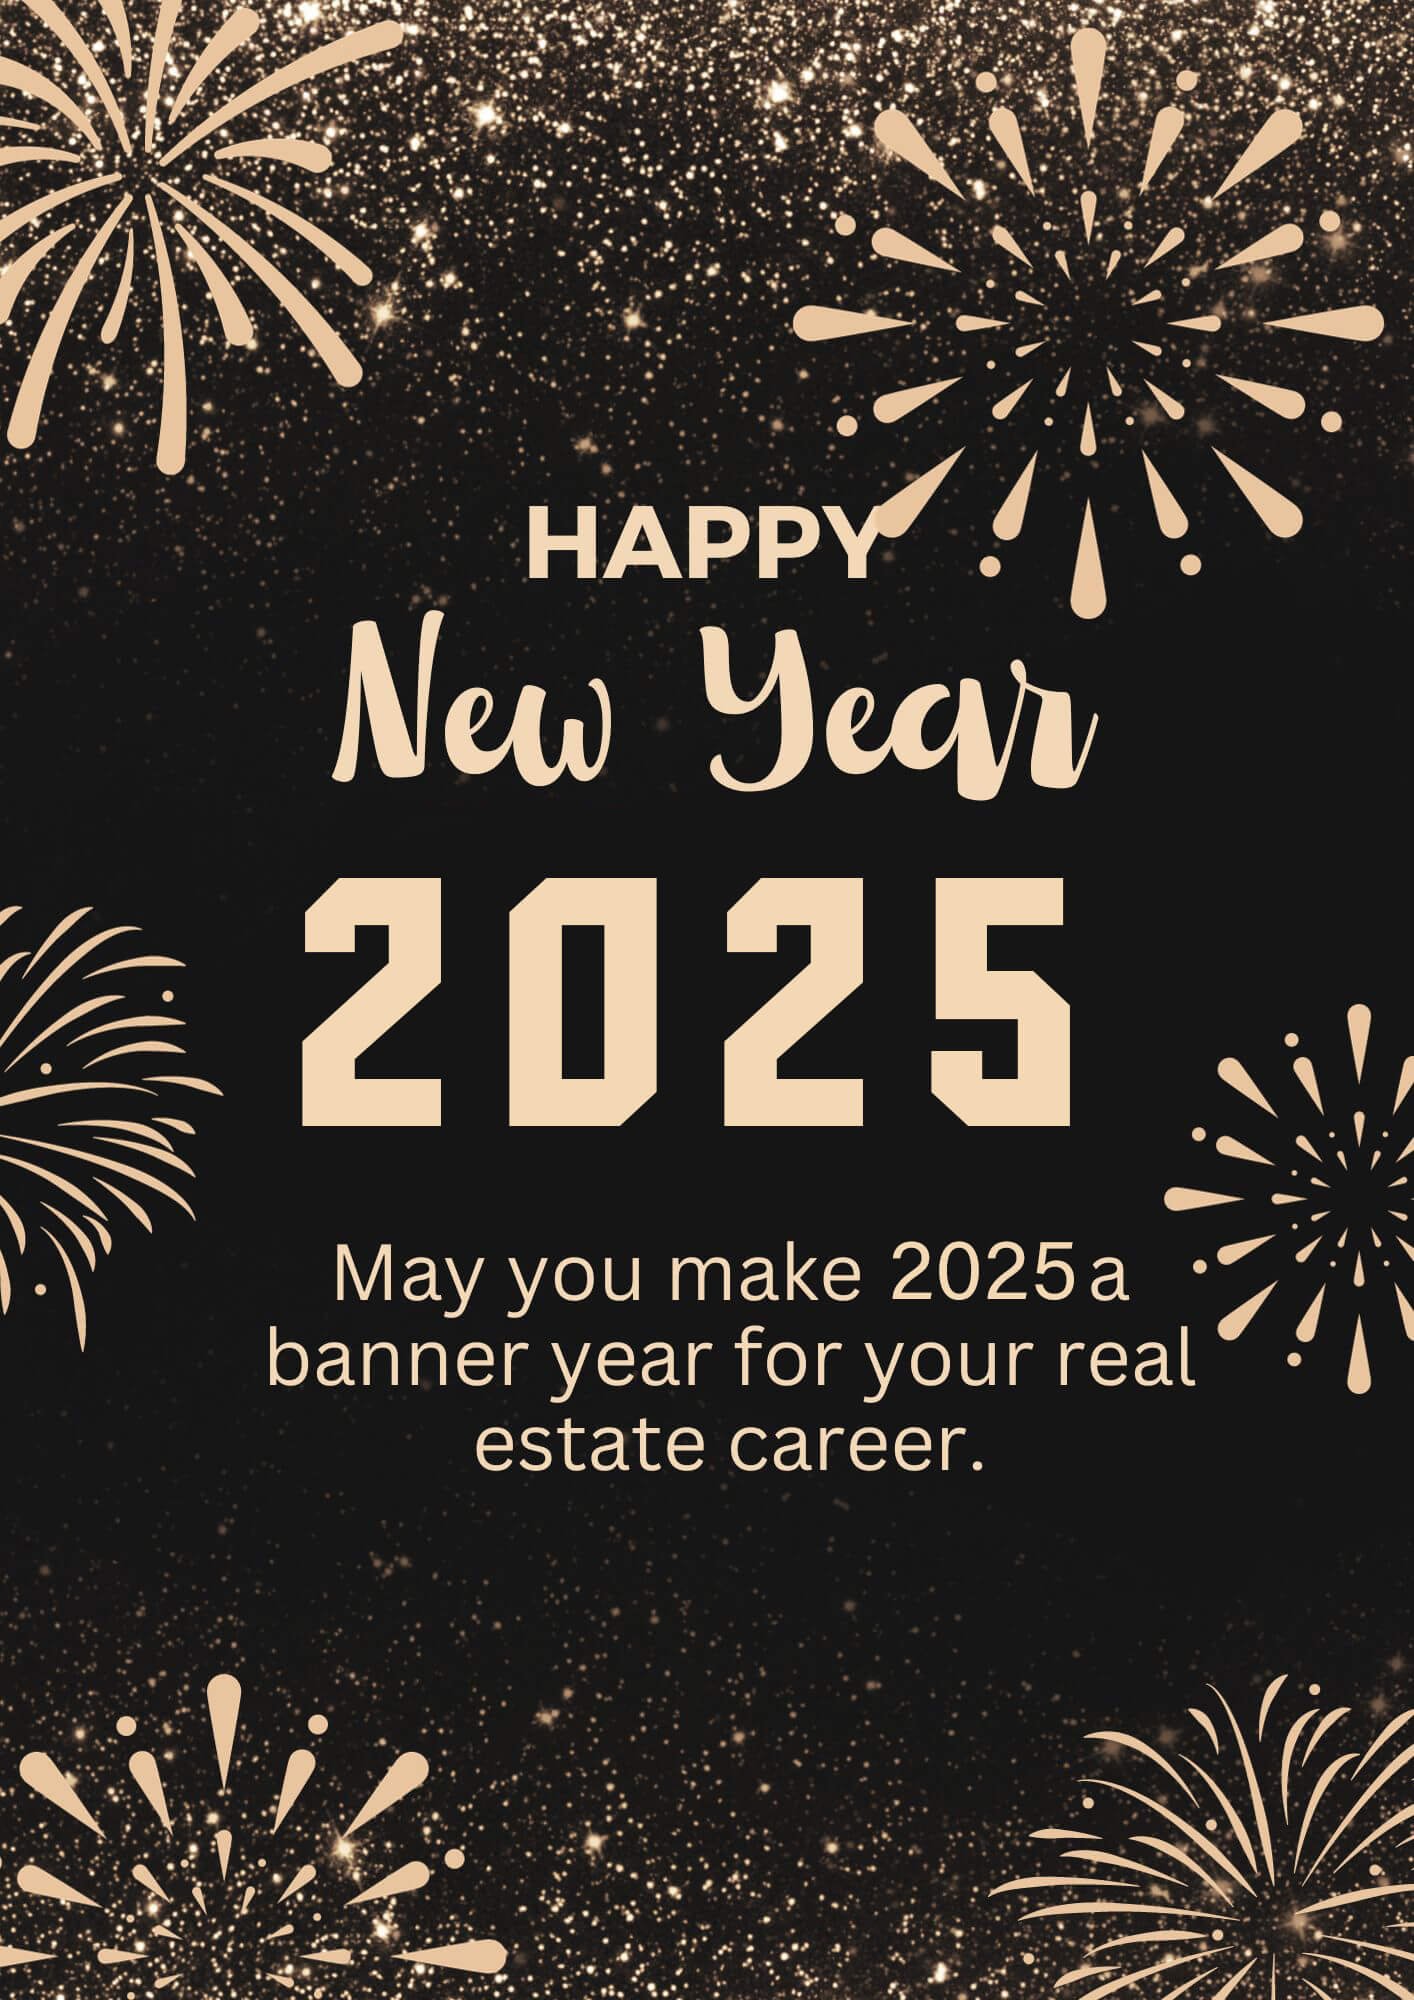 2025 Happy New Year Wishes For Real Estate